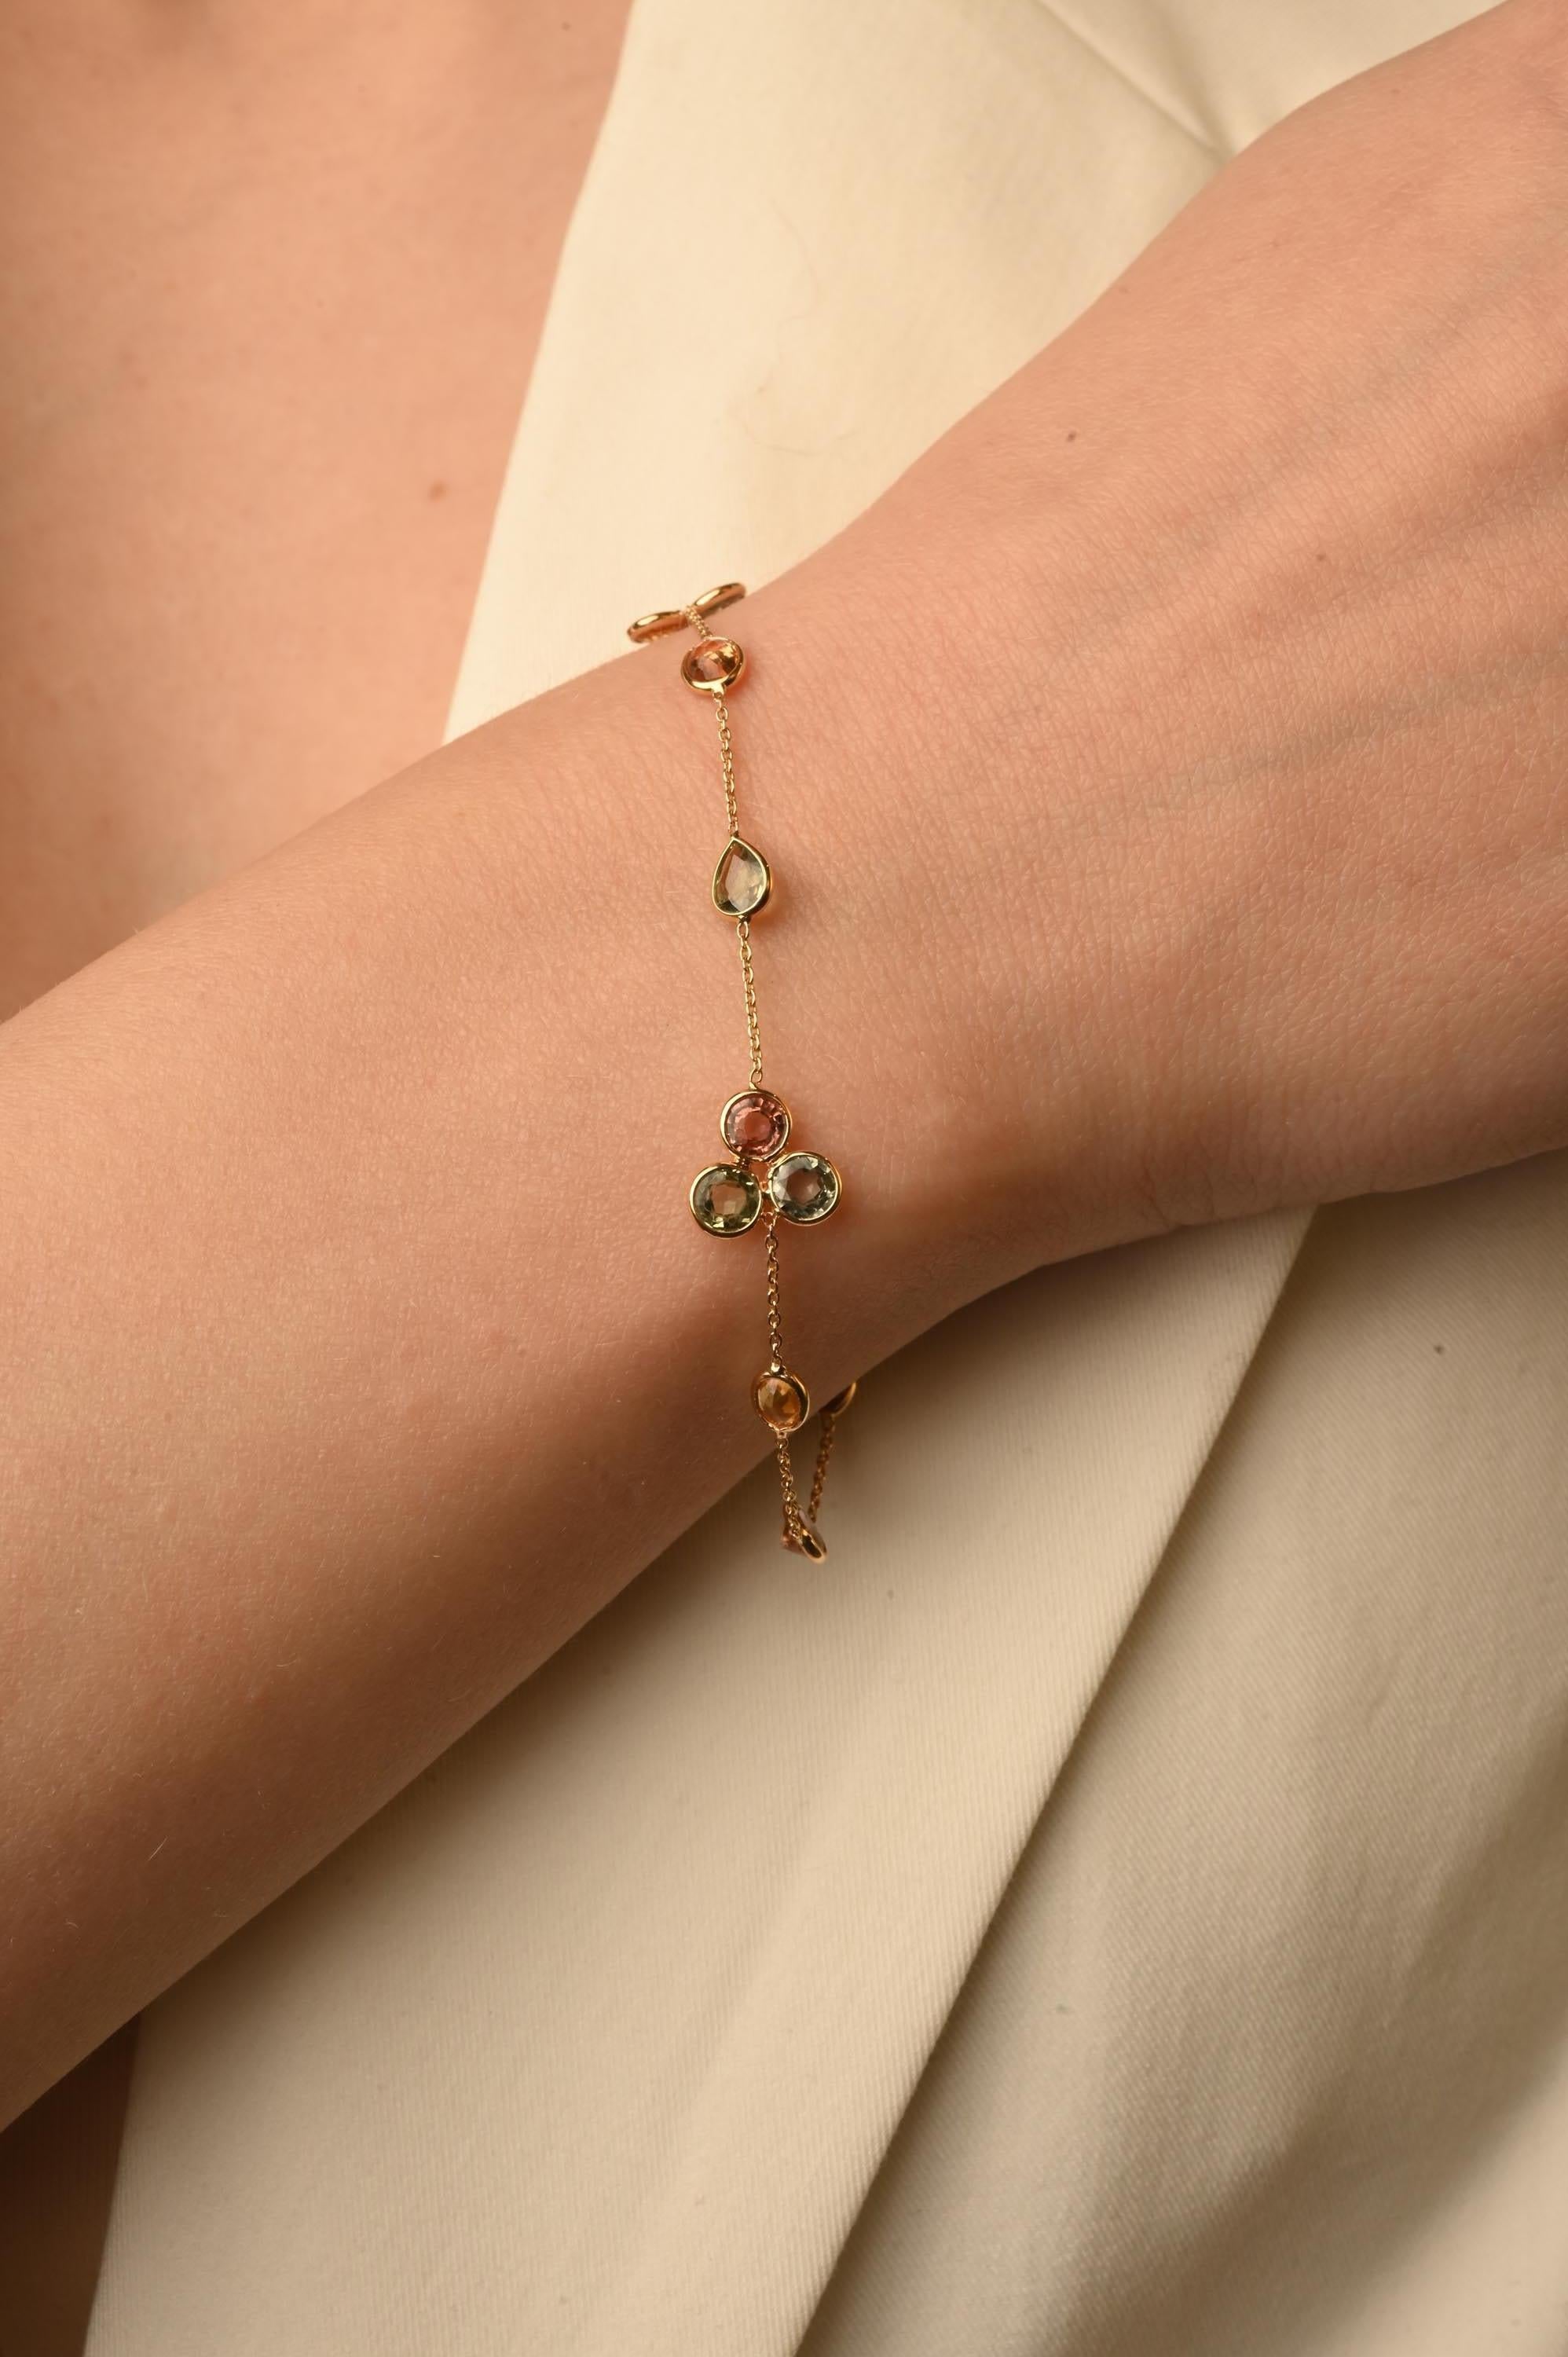 Multi sapphire dainty flower bracelet in 18k gold for women. A gold gemstone bracelet is the ultimate statement piece for every stylish woman.
Adorn your wrist with this beautiful mix cut multi sapphire chain bracelet in 18 Karat Gold. Each piece is